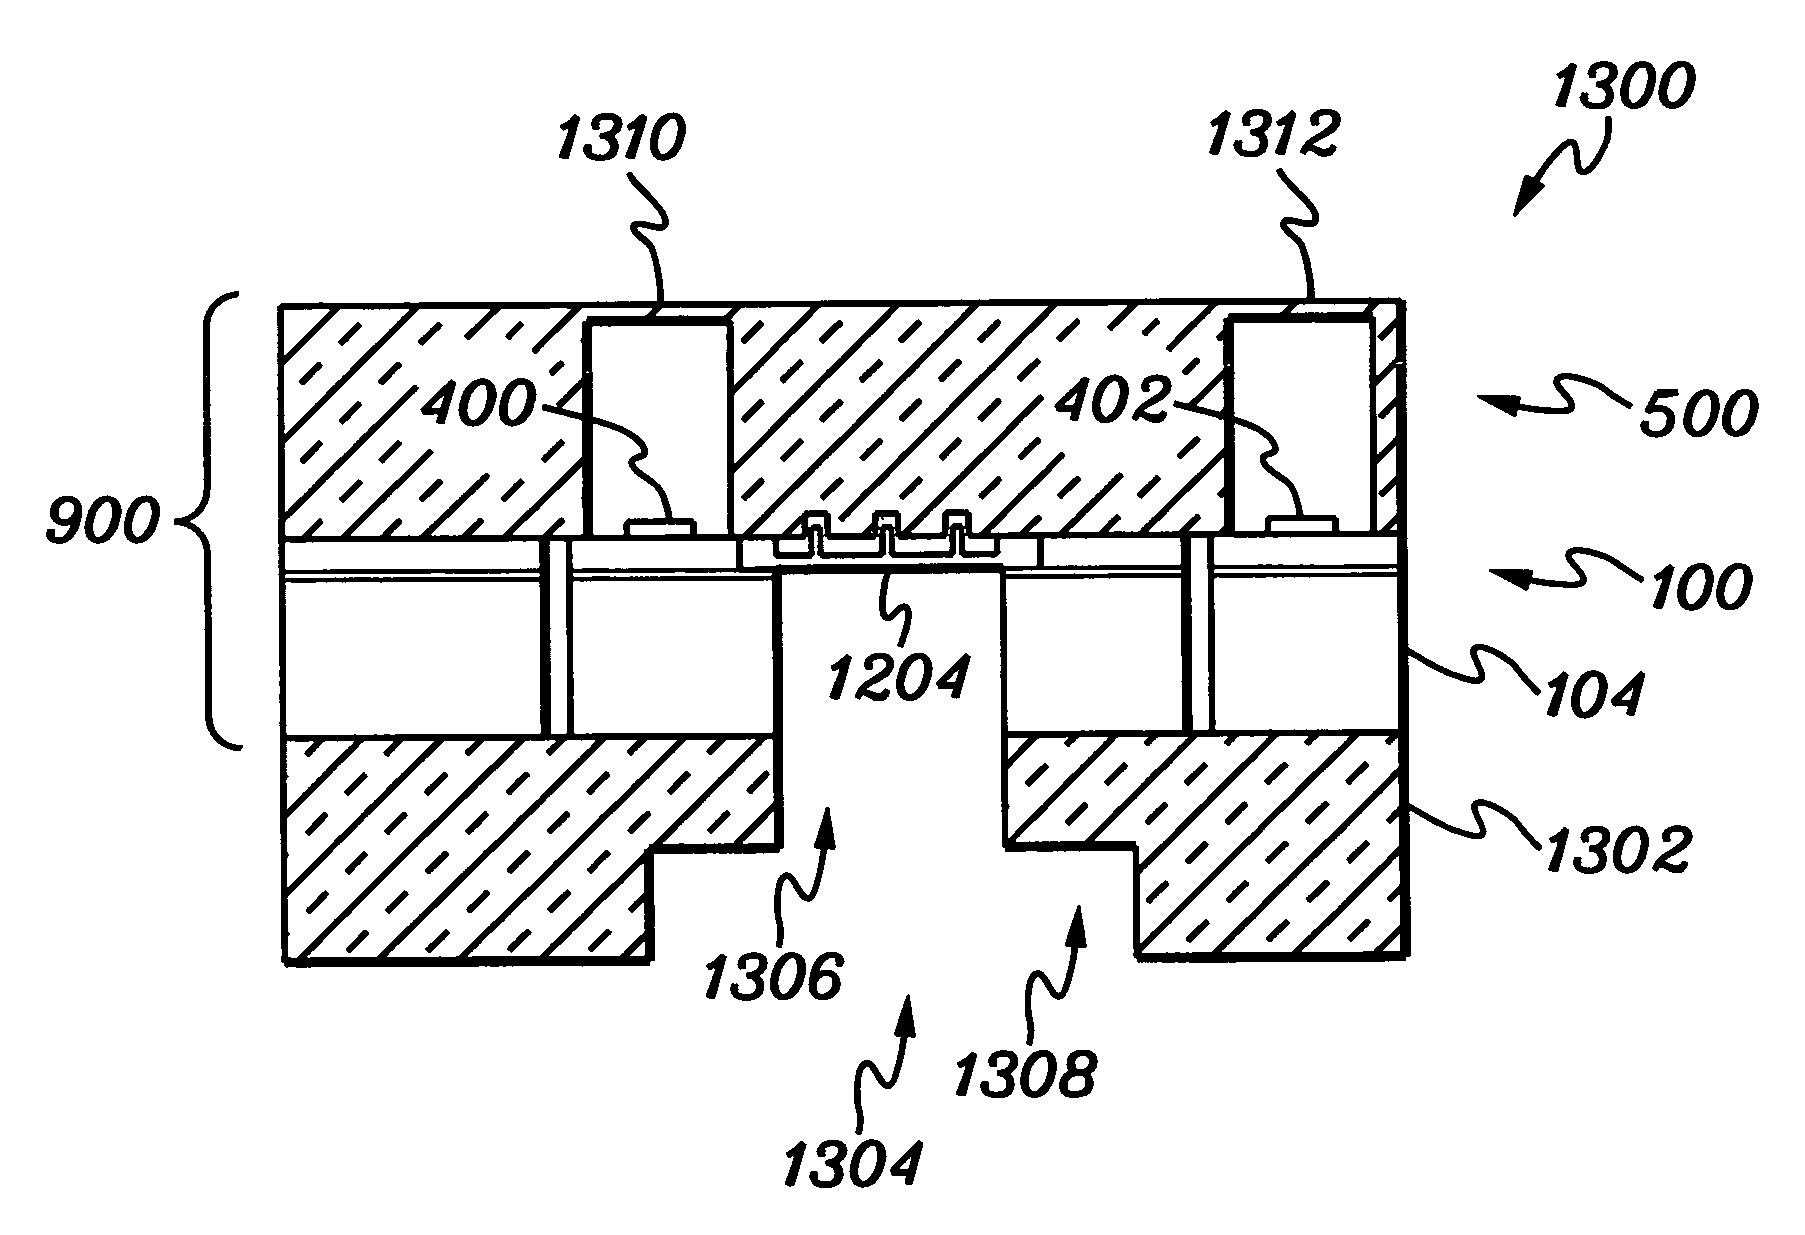 MEMS structure with anodically bonded silicon-on-insulator substrate